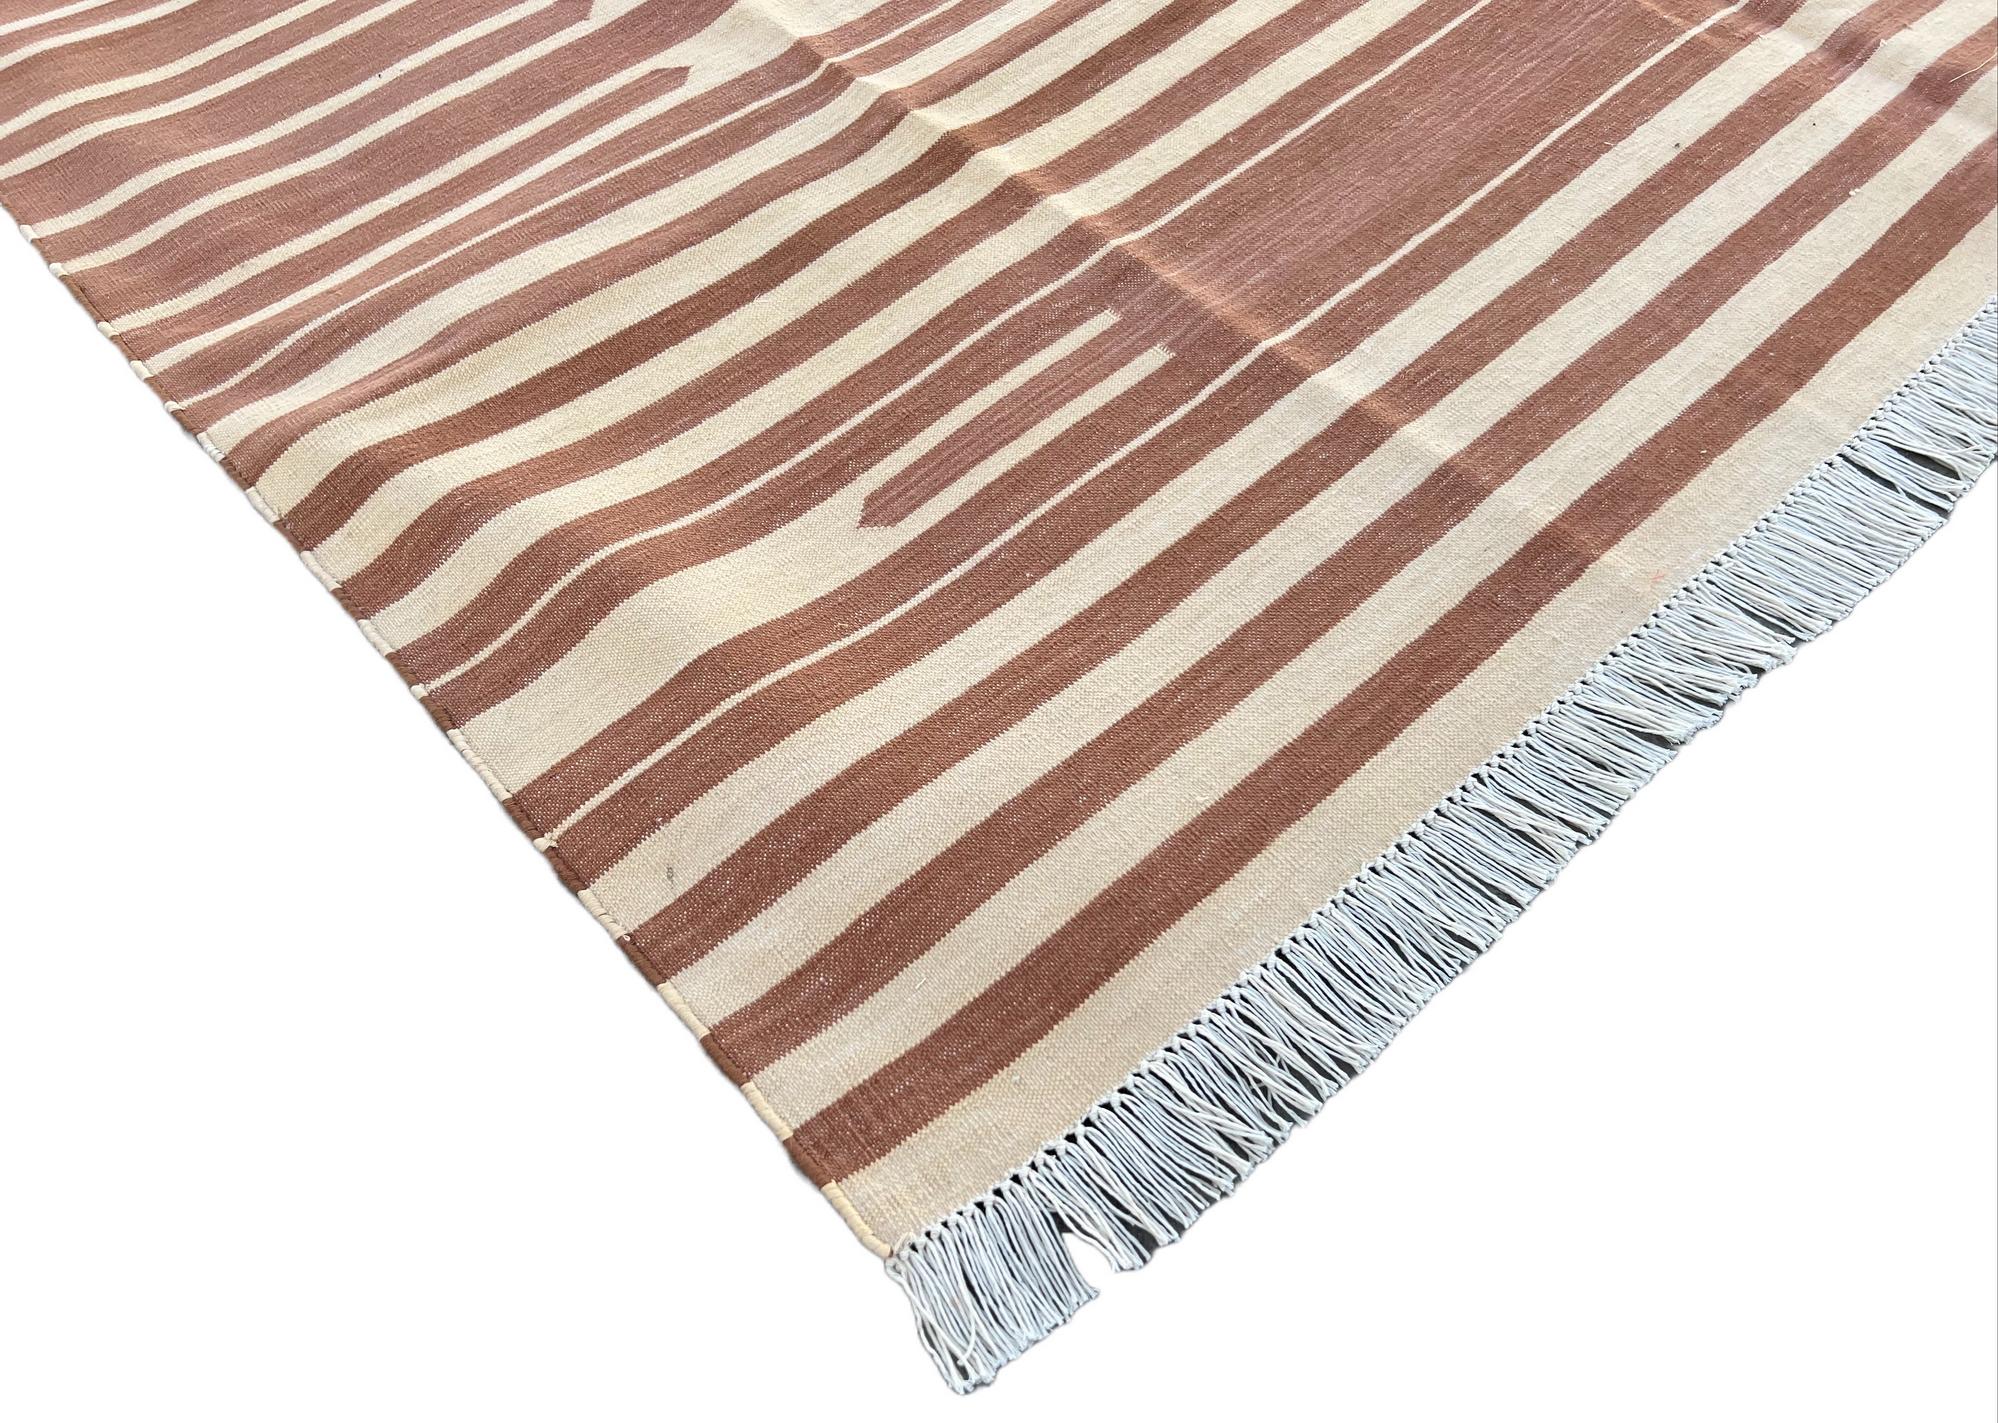 Mid-Century Modern Handmade Cotton Area Flat Weave Rug, 5x7 Tan And Cream Striped Indian Dhurrie For Sale